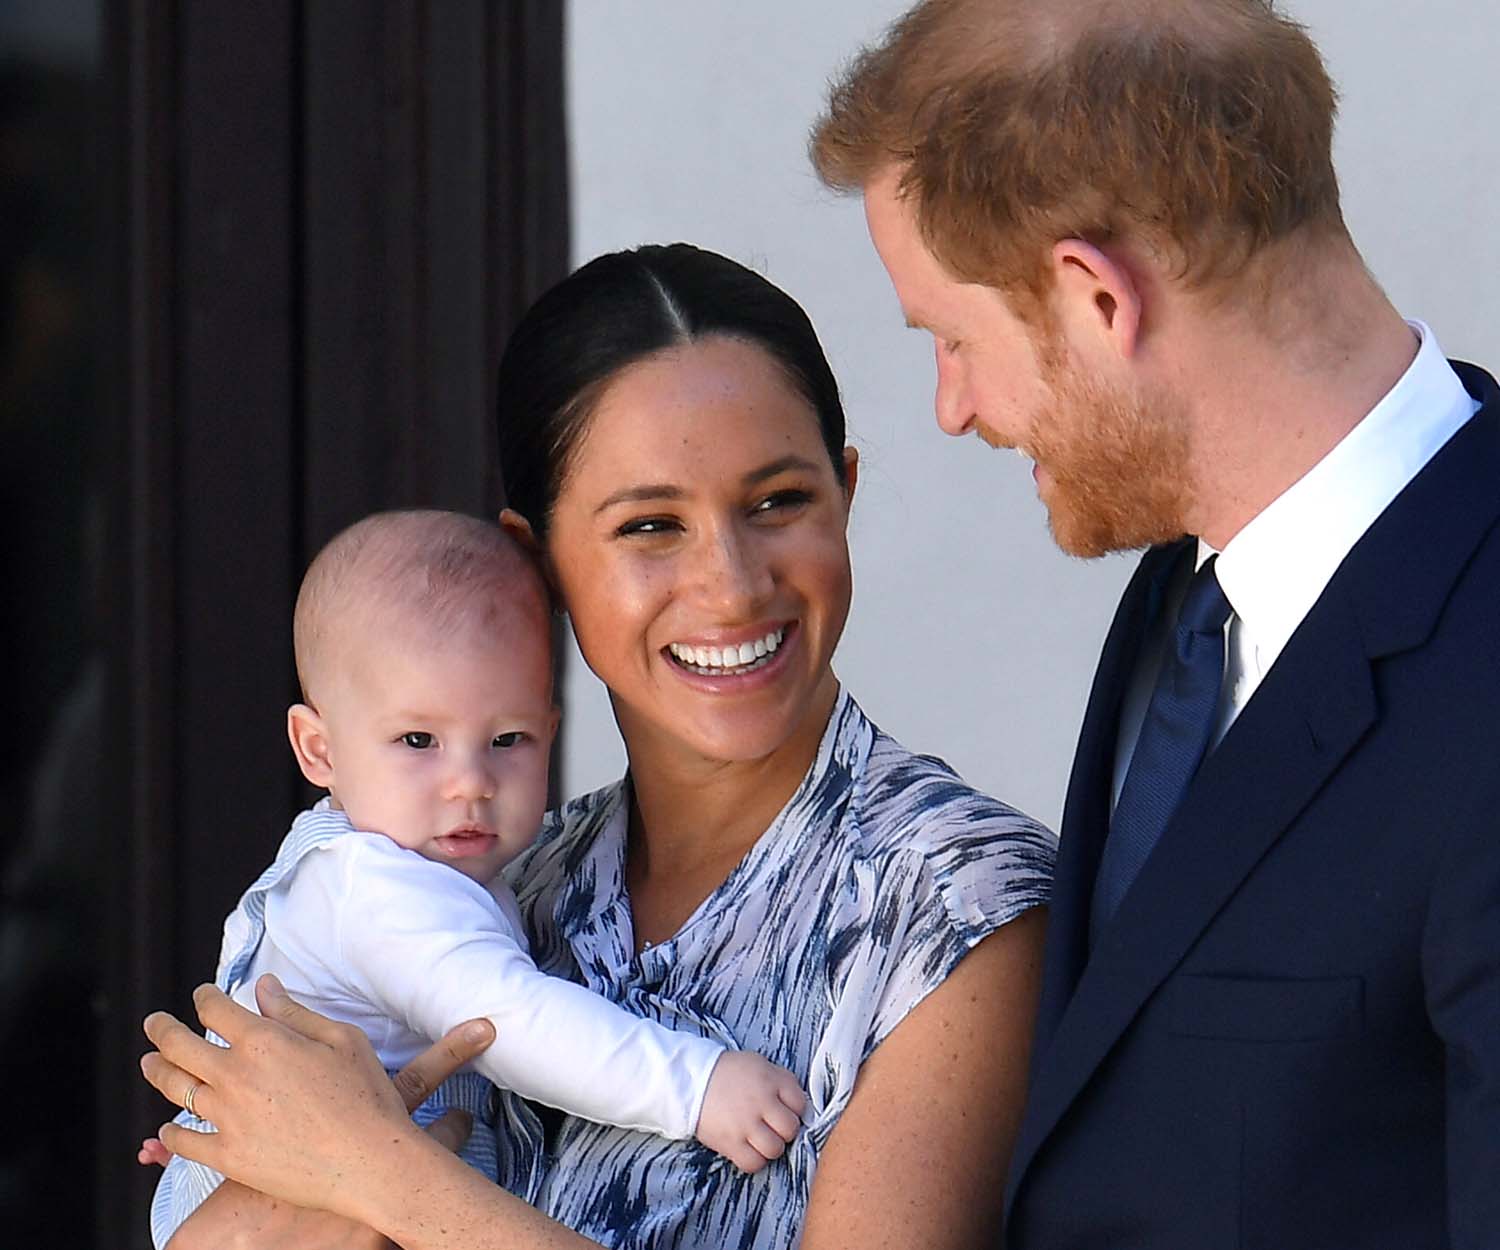 The Archie Effect: Kiwi company’s sales ‘go through roof’ after royal baby Archie wears one of their hats